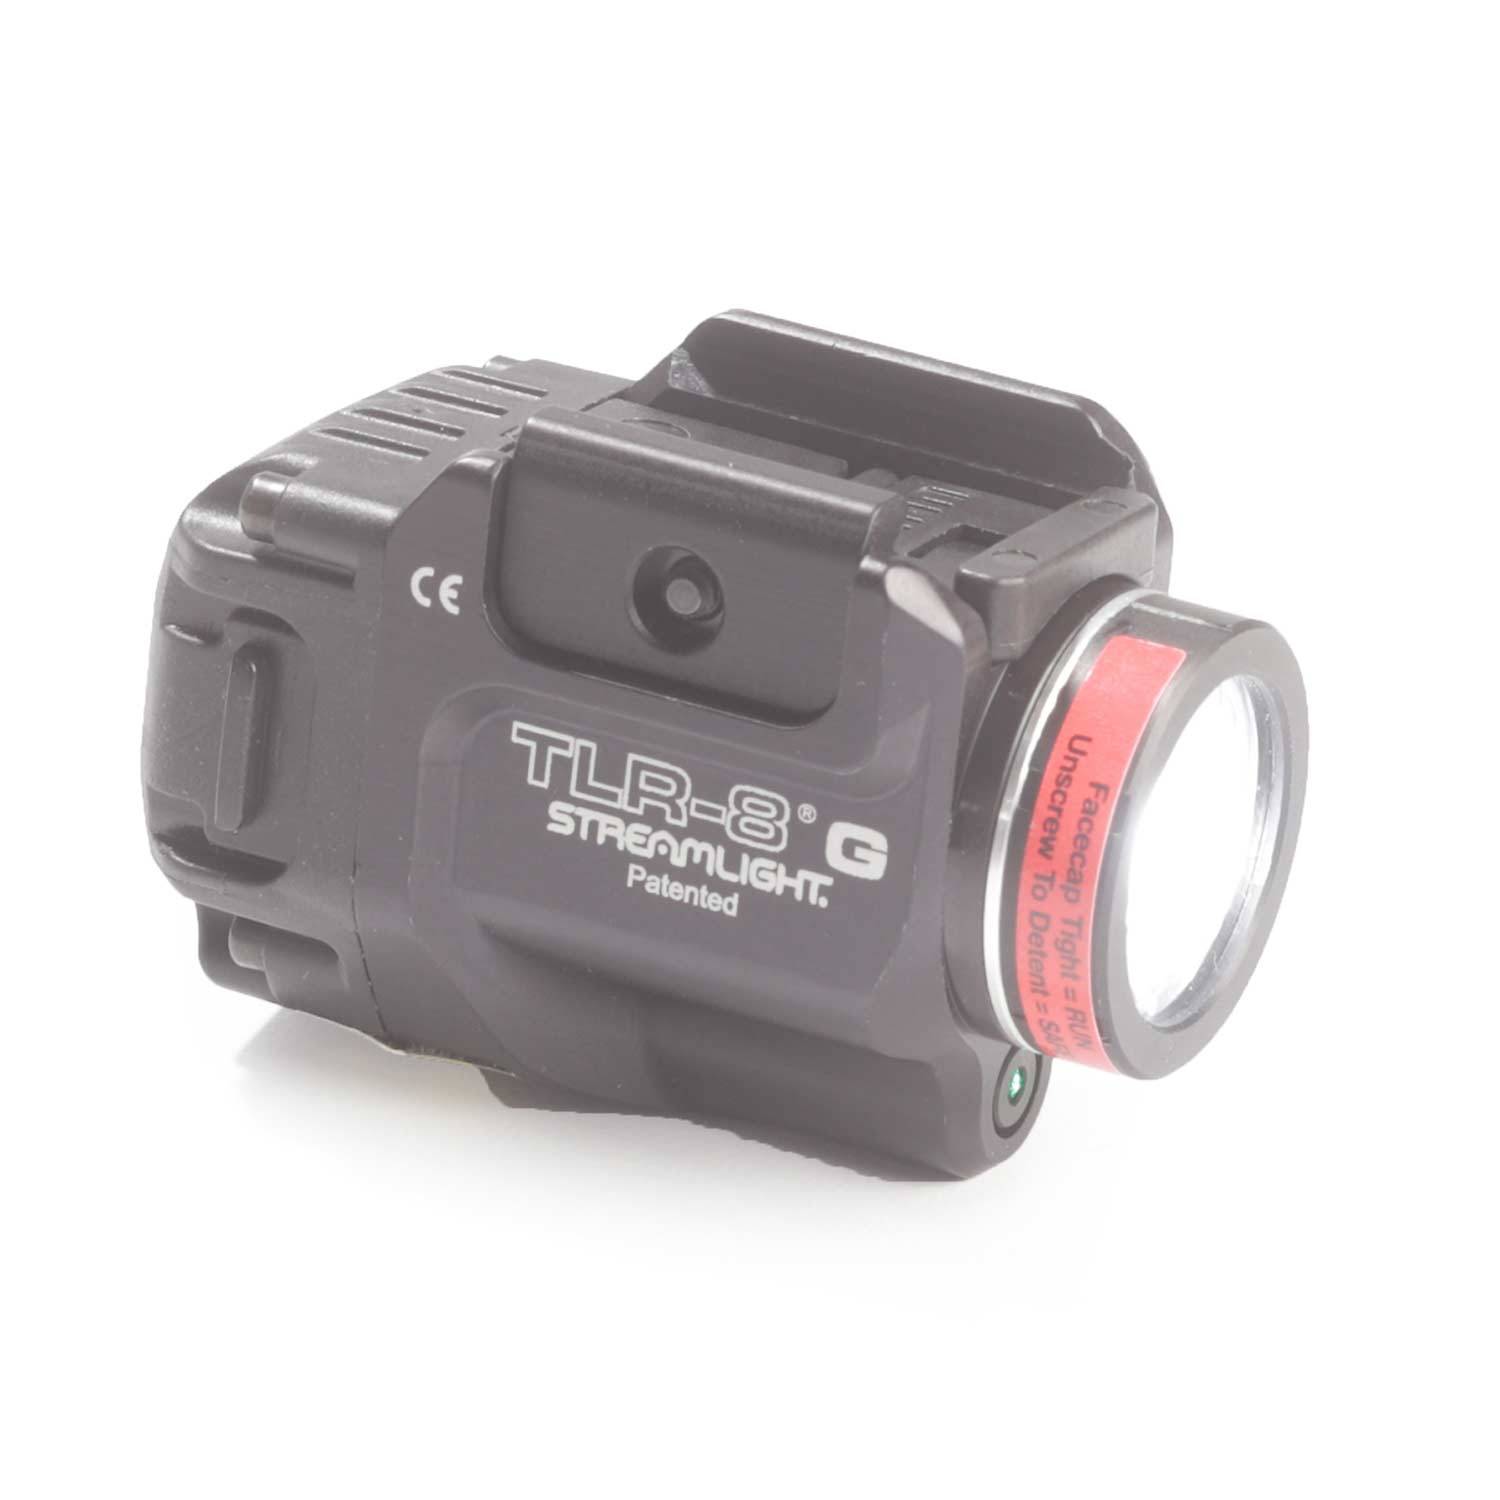 Streamlight TLR-8 G Weapon Light with Green Laser